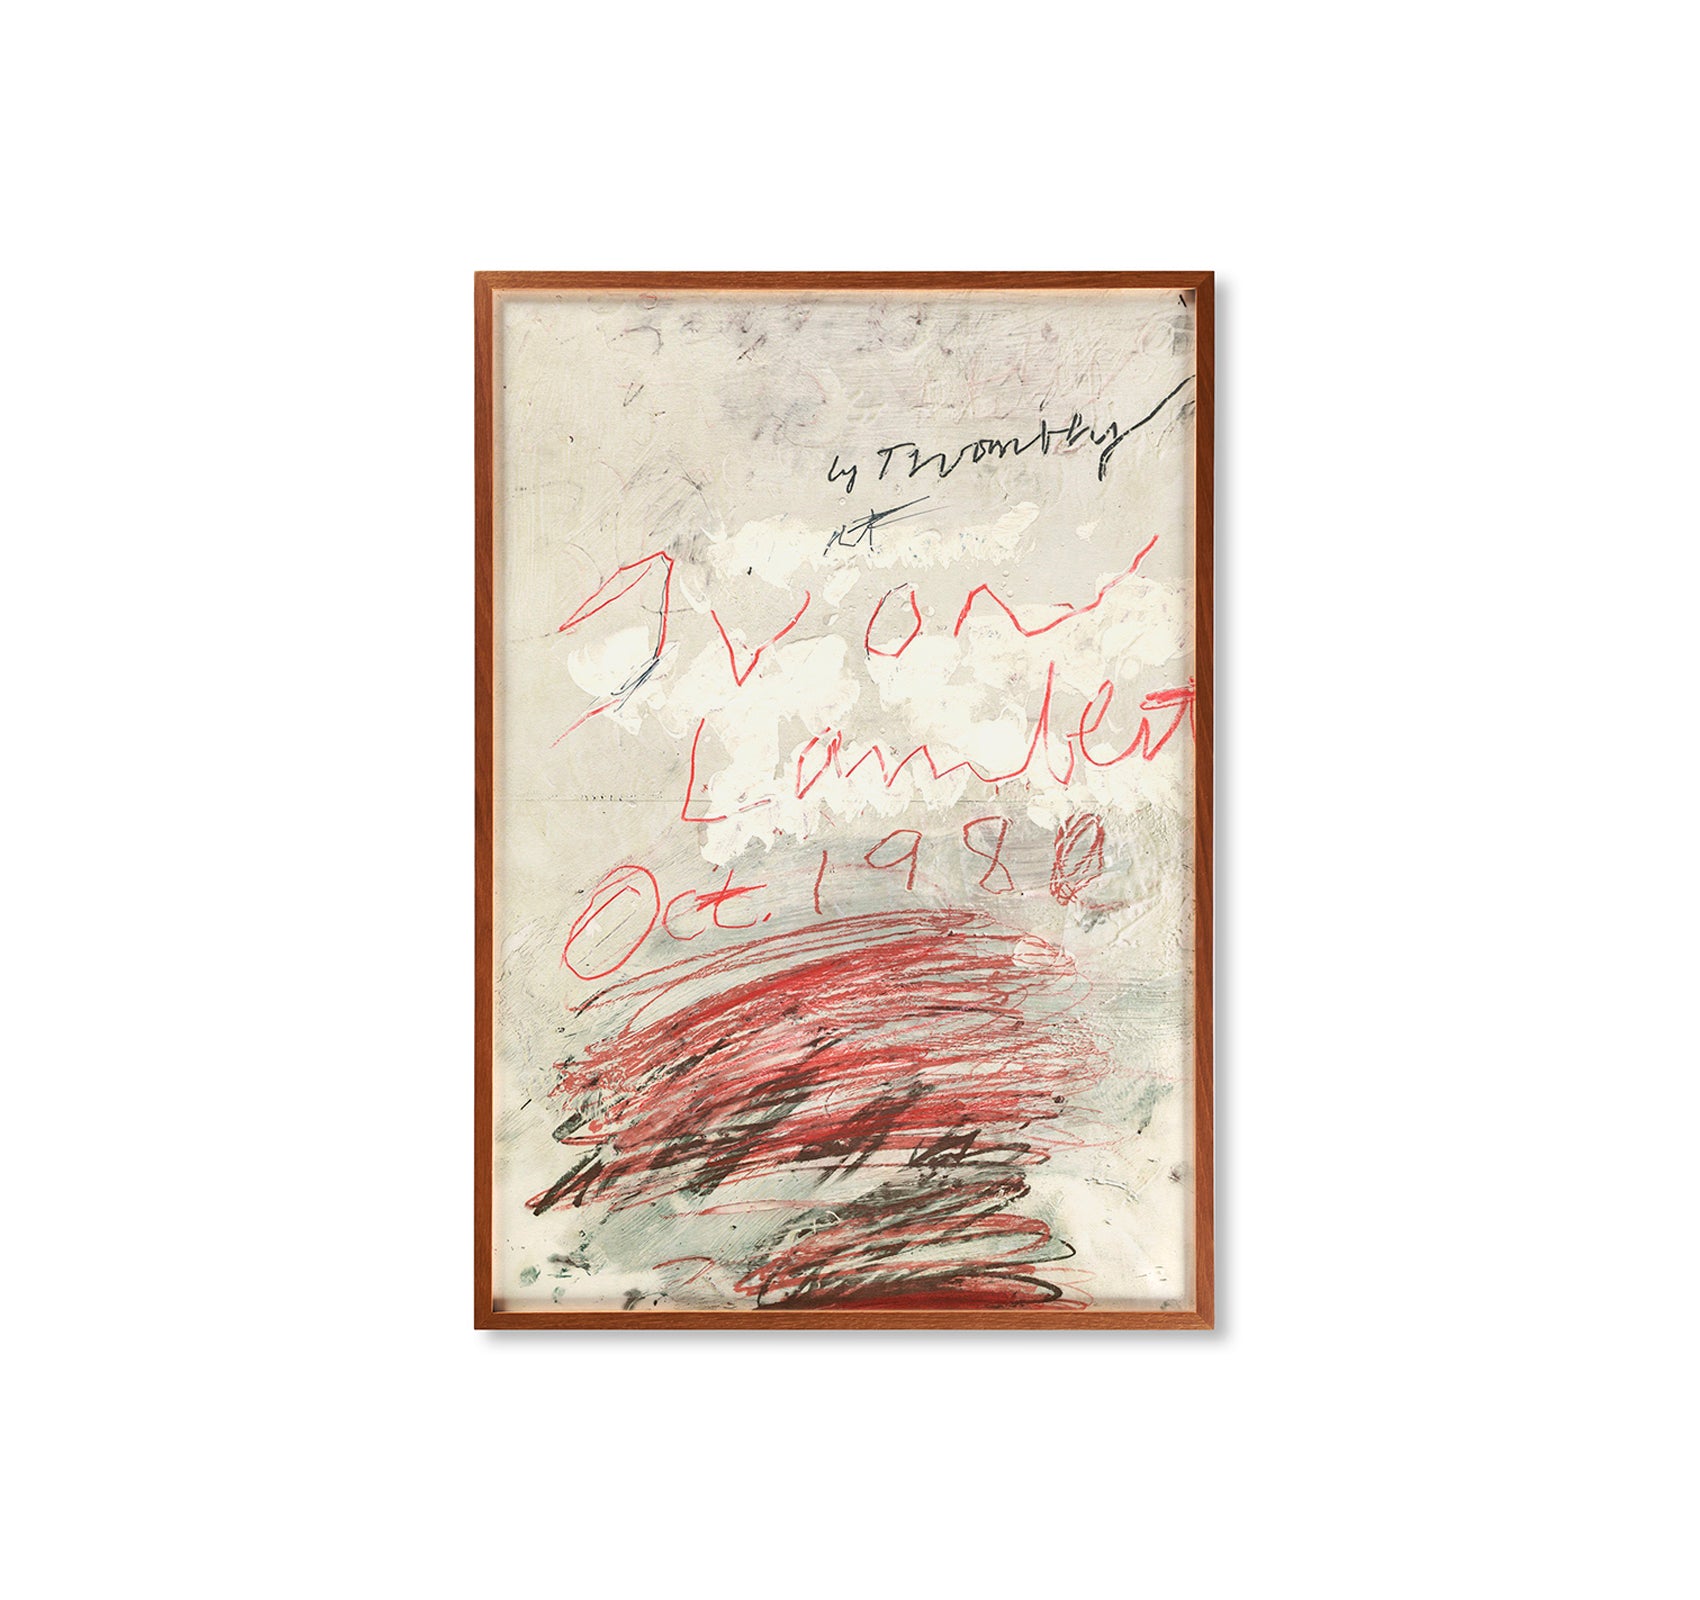 POSTER PROJECT (1980) by Cy Twombly